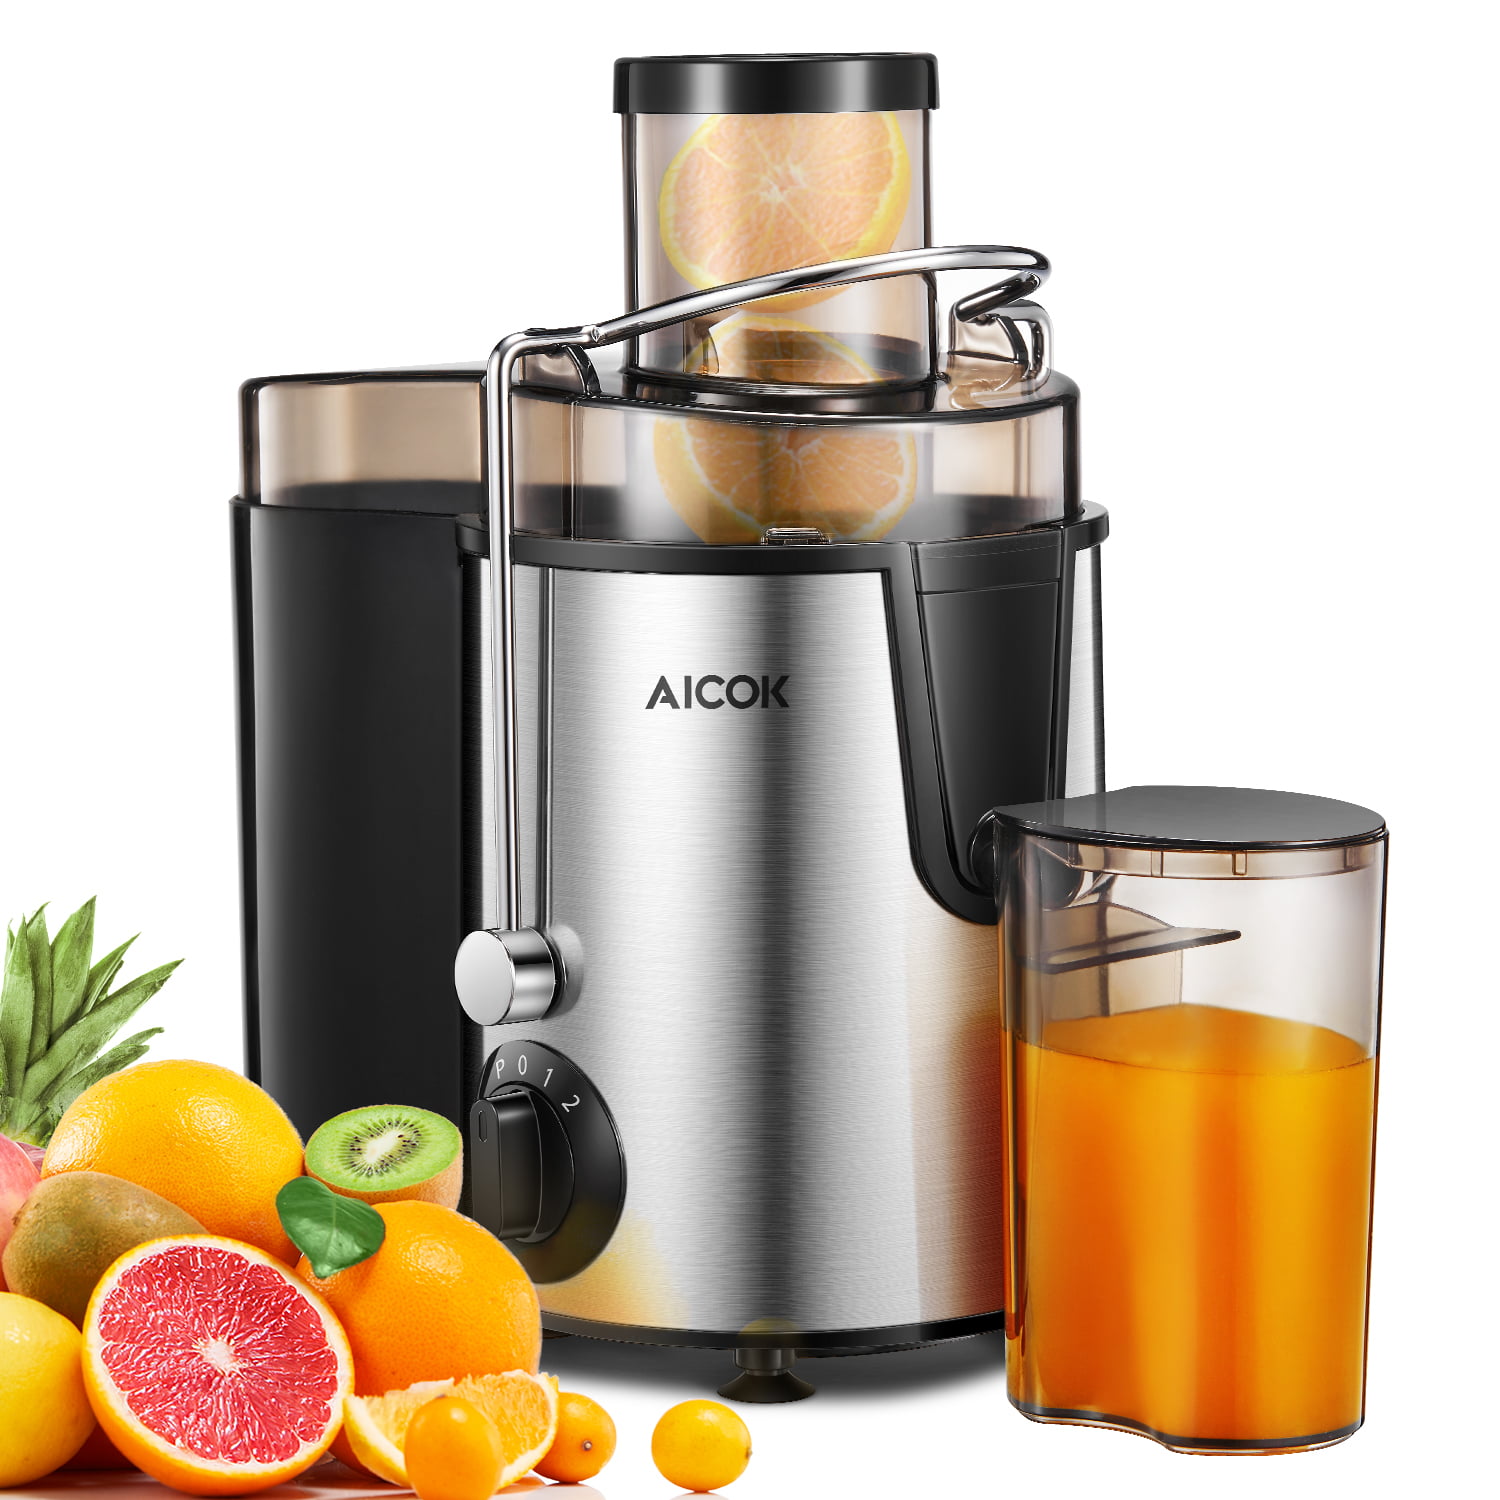 AICOK Centrifugal Stainless Steel Juicer w/ Multi-Speed Control $40 + Free Shipping